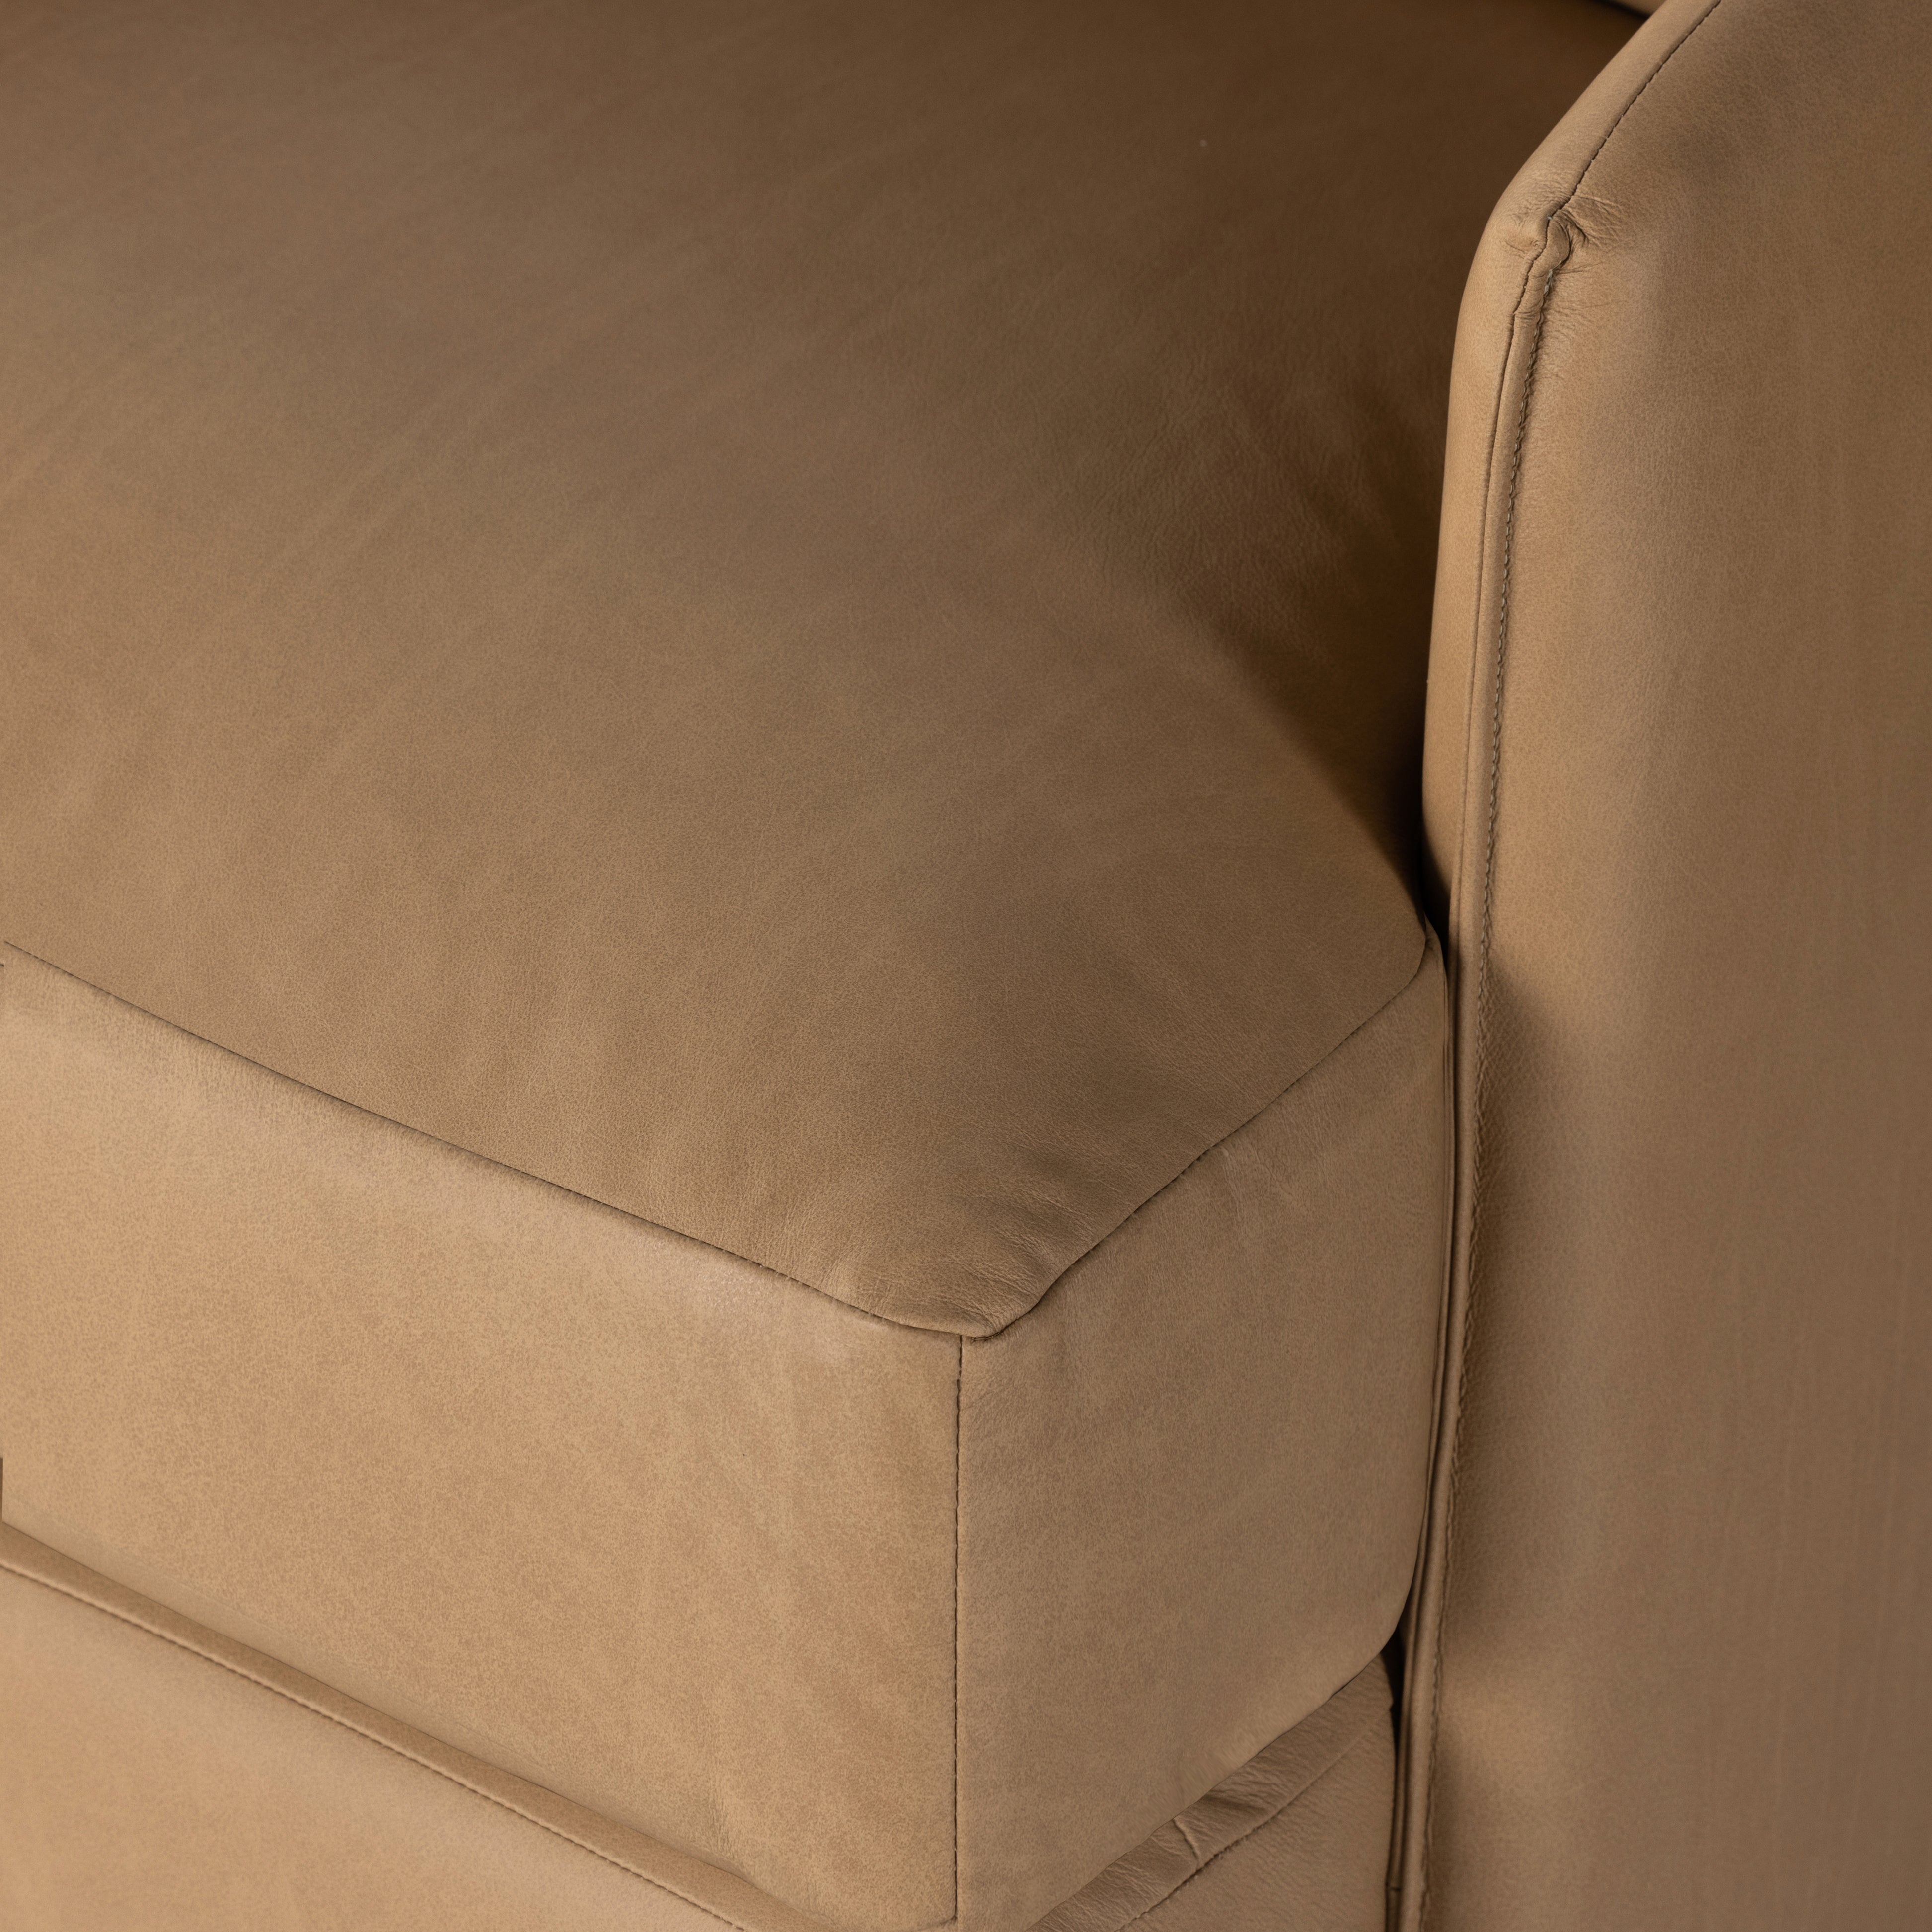 Nantucket Taupe Leather | Whittaker Swivel Chair | Valley Ridge Furniture